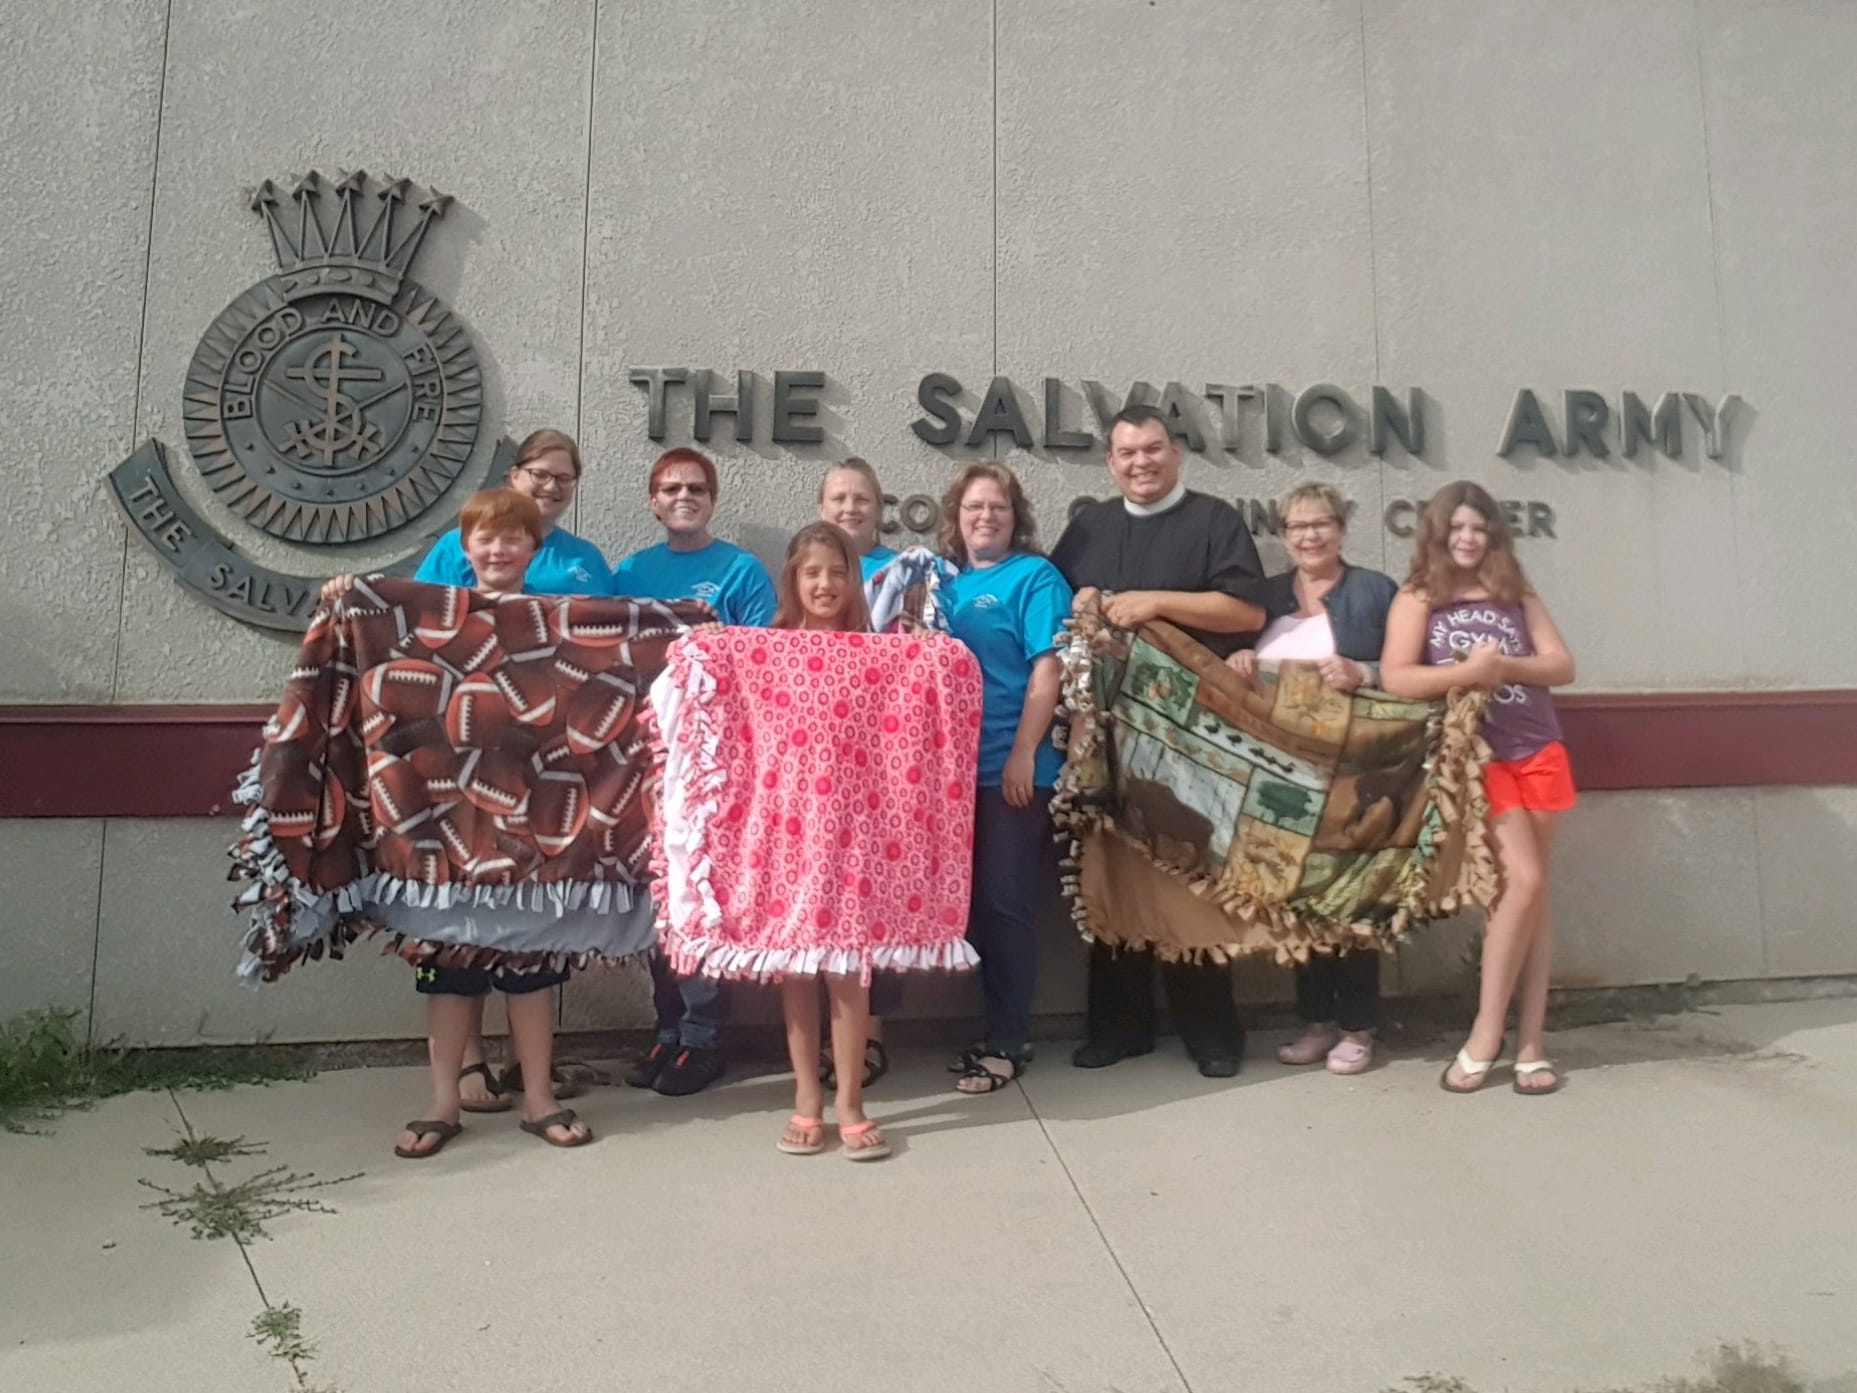 Nine people of various ages holding homemade tie blankets in front of a Salvation Army for donation